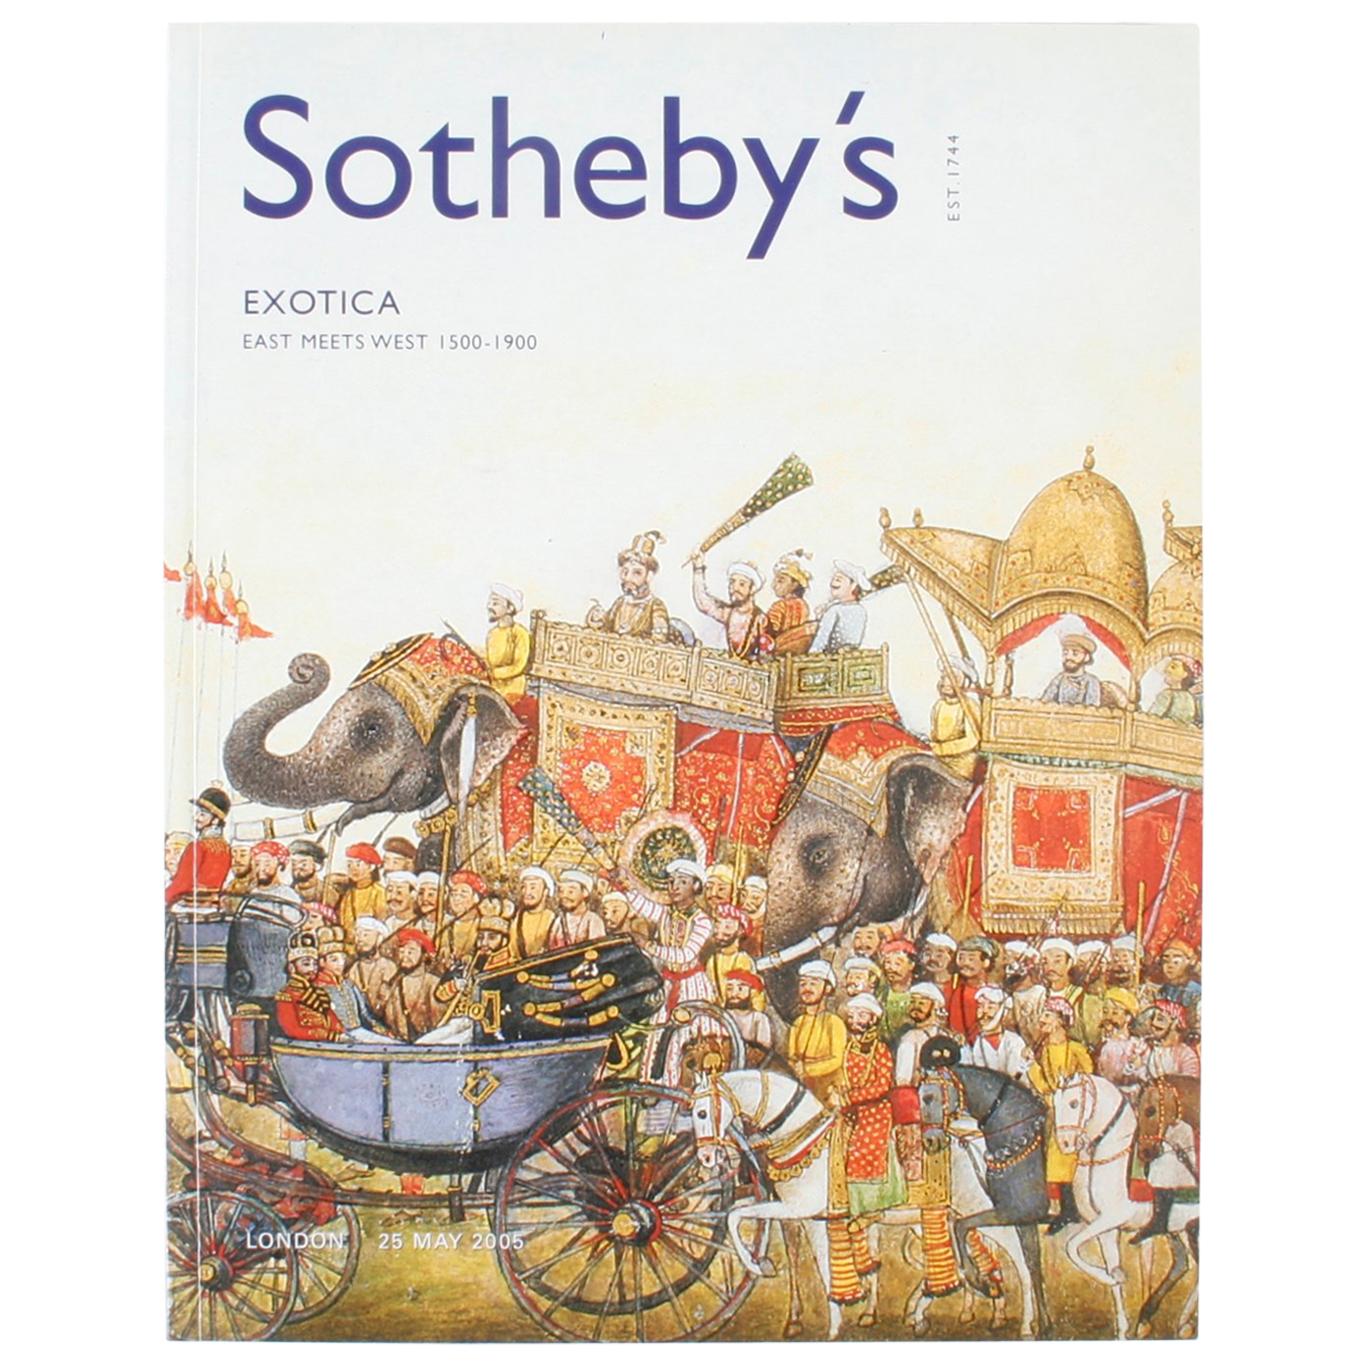 Sotheby's: Catalogue Exotica East Meets West 1500-1900, May 2005 For Sale